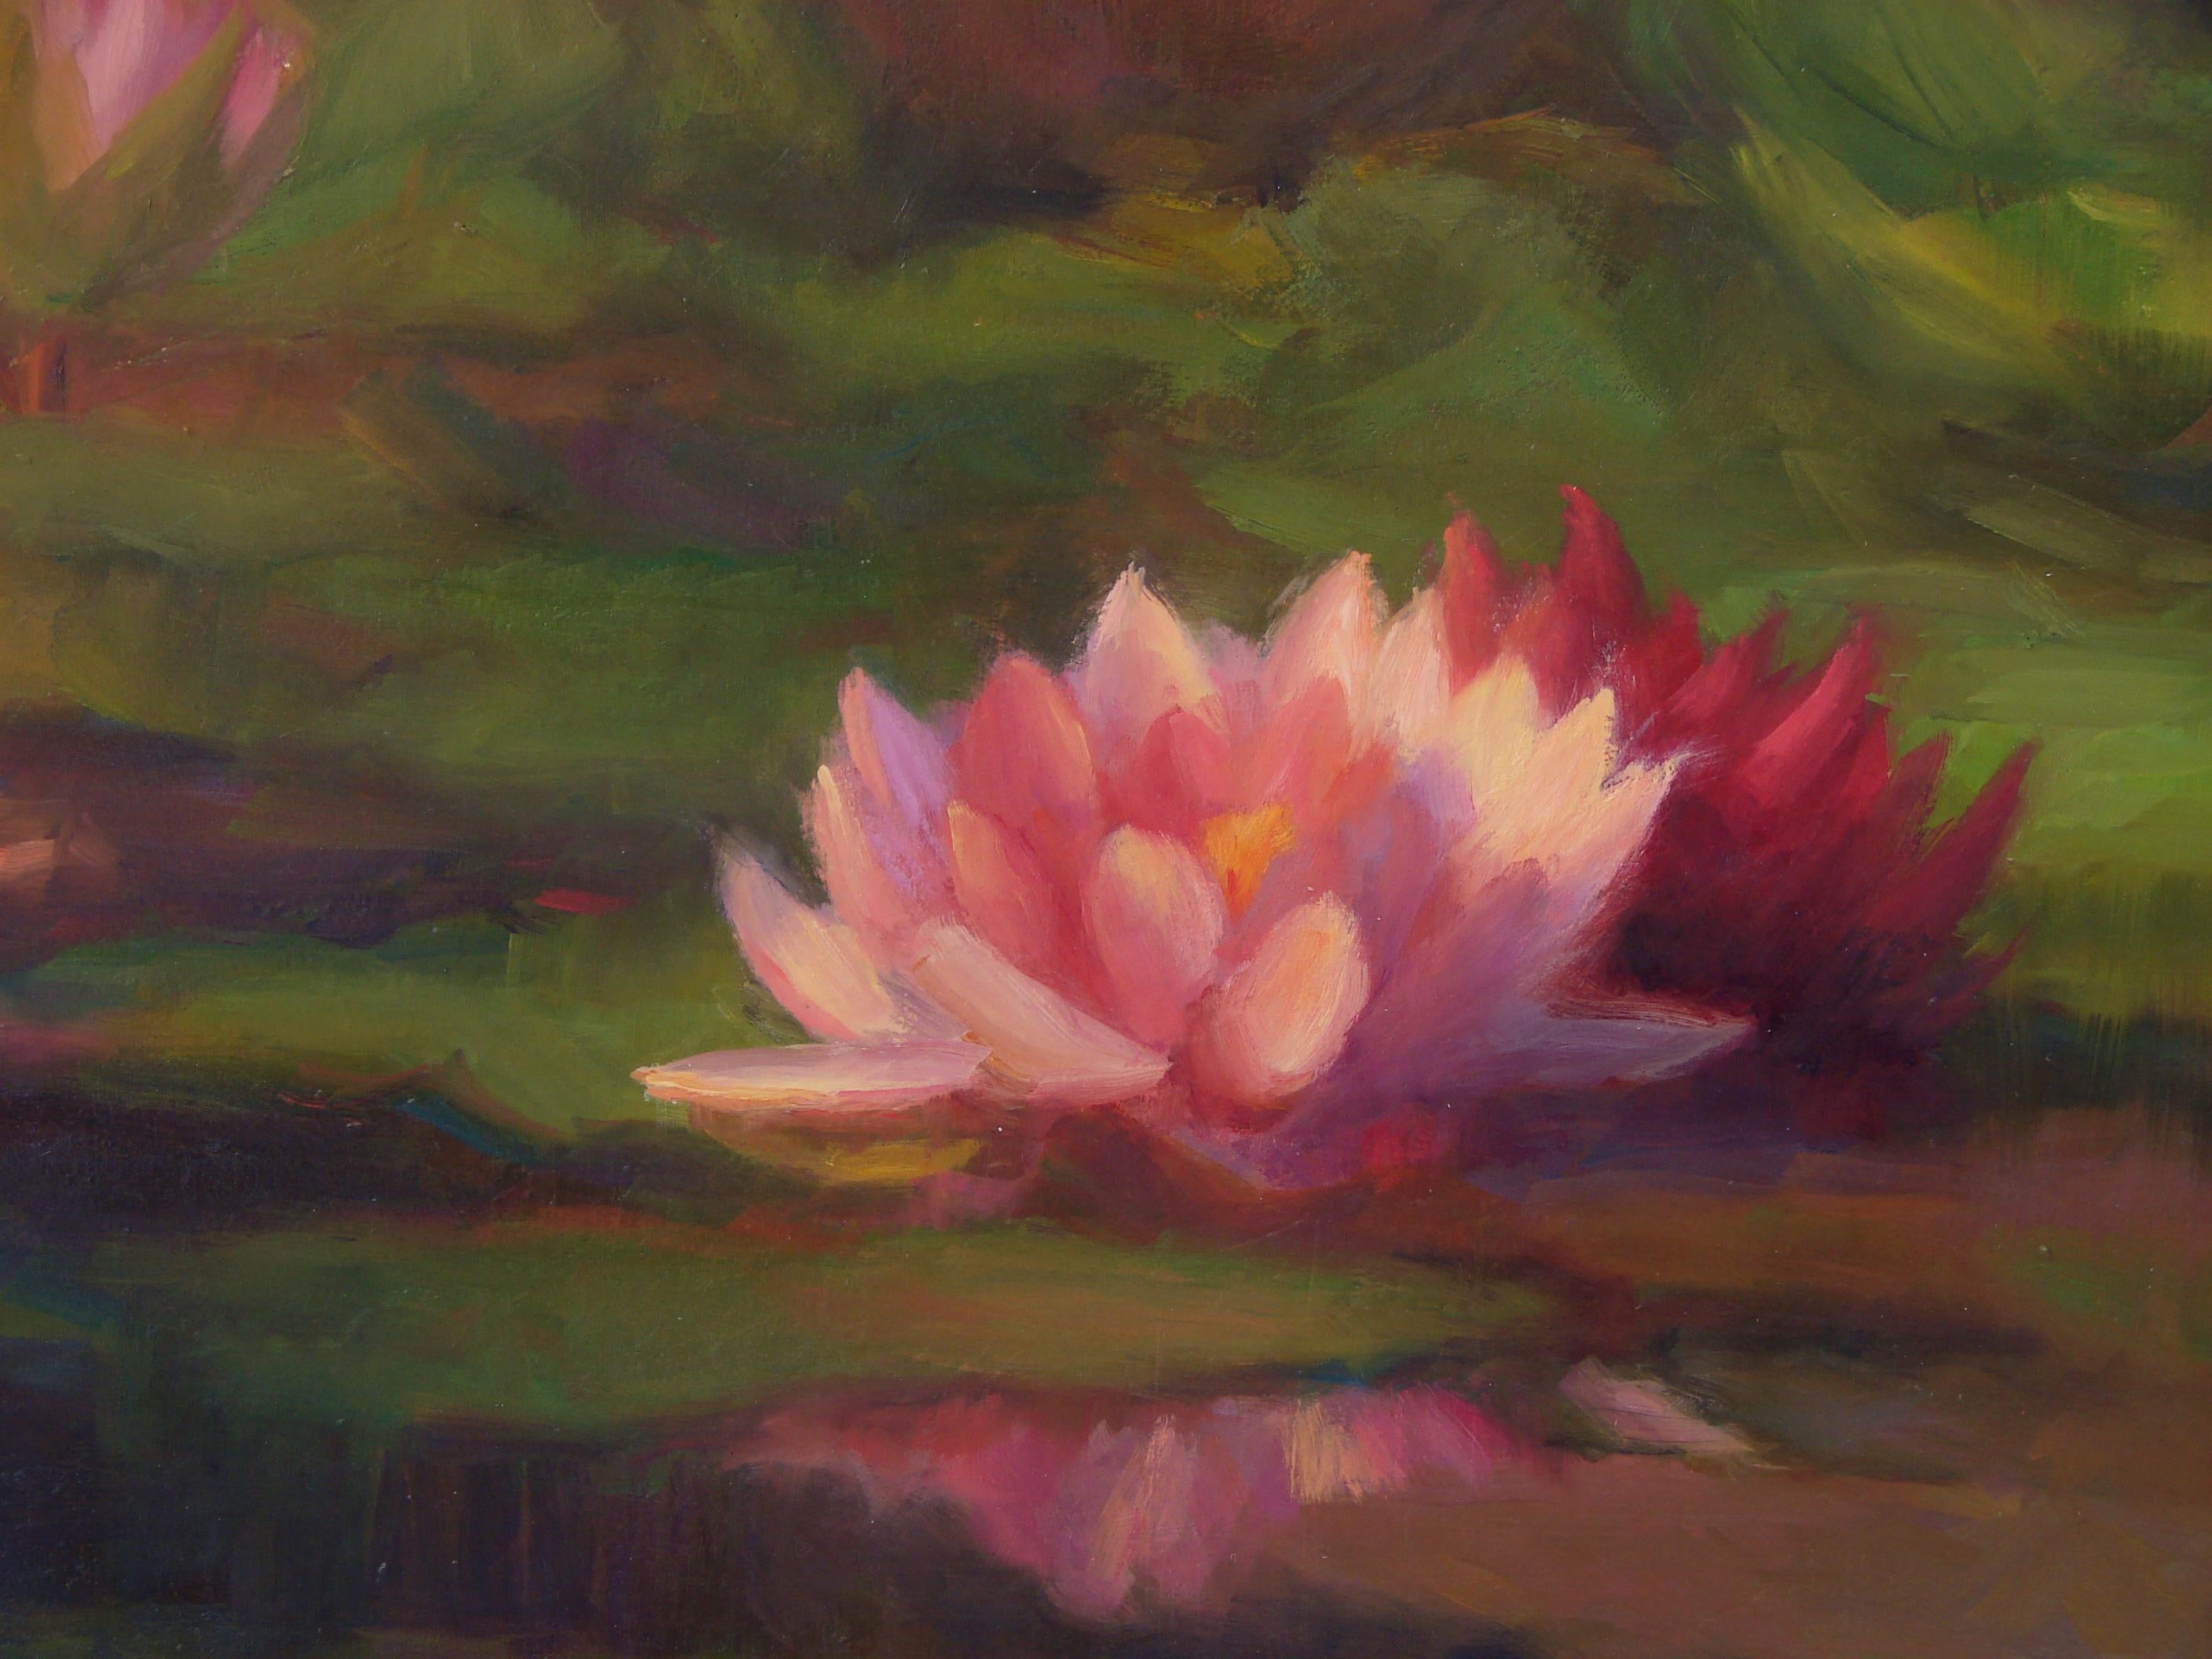 <p>Artist Comments<br />Artist Sherri Aldawood encountered these glowing waterlilies in a fountain at Mission San Juan Capistrano in California. Soft morning light warms the pink flowers and lilypads while gentle reflections echo across the water.